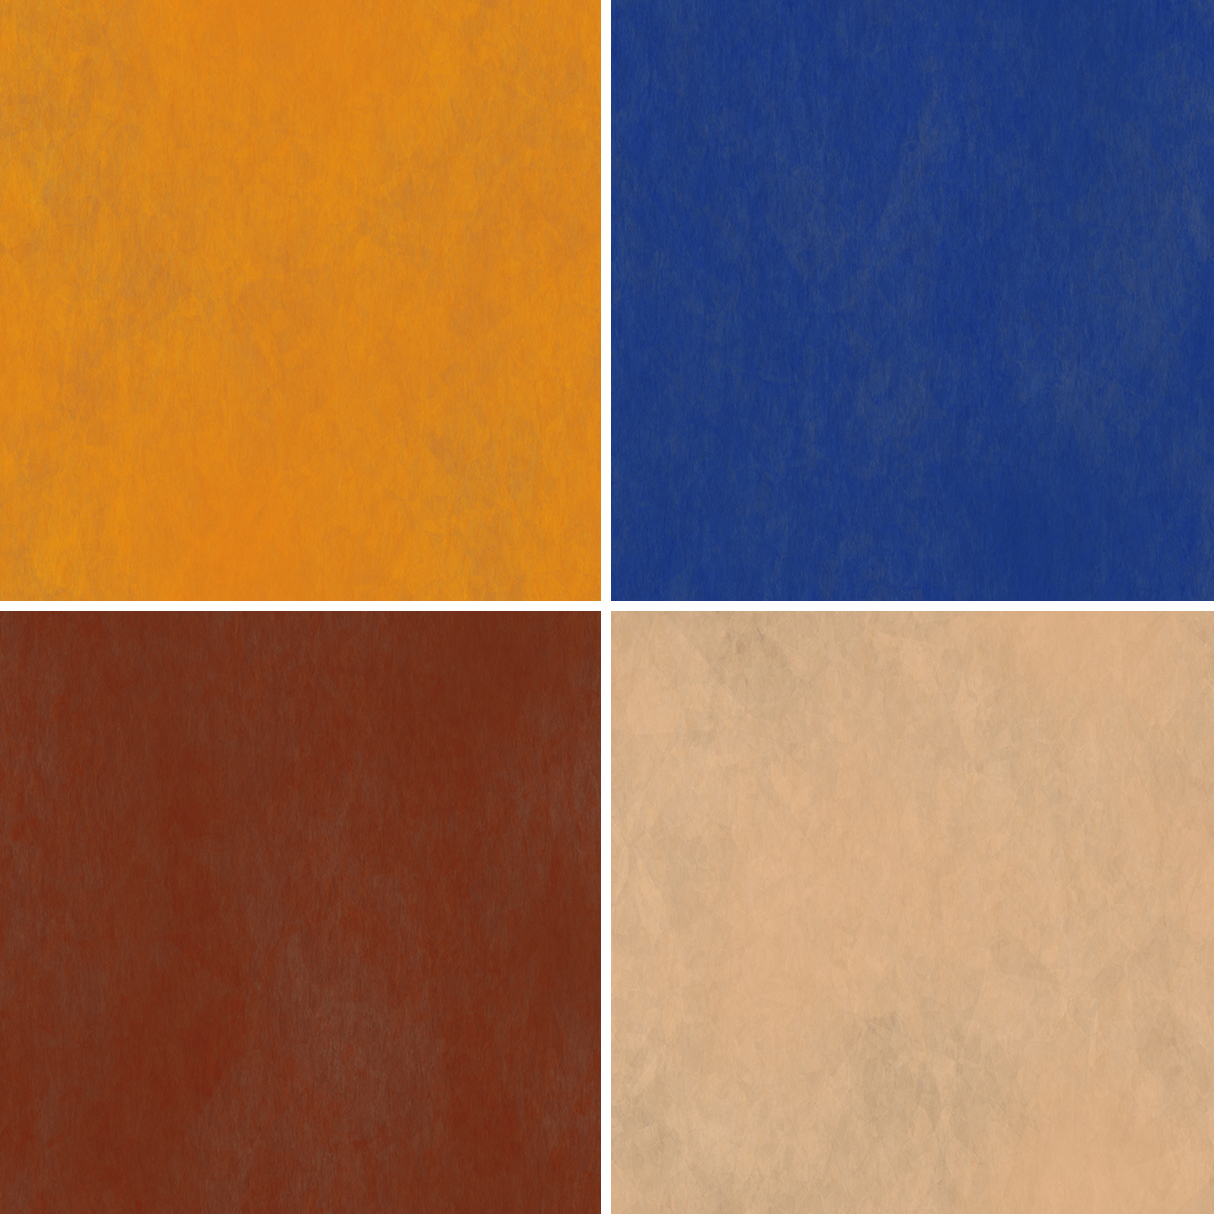 30 Suede Background Textures Samples – Part 7